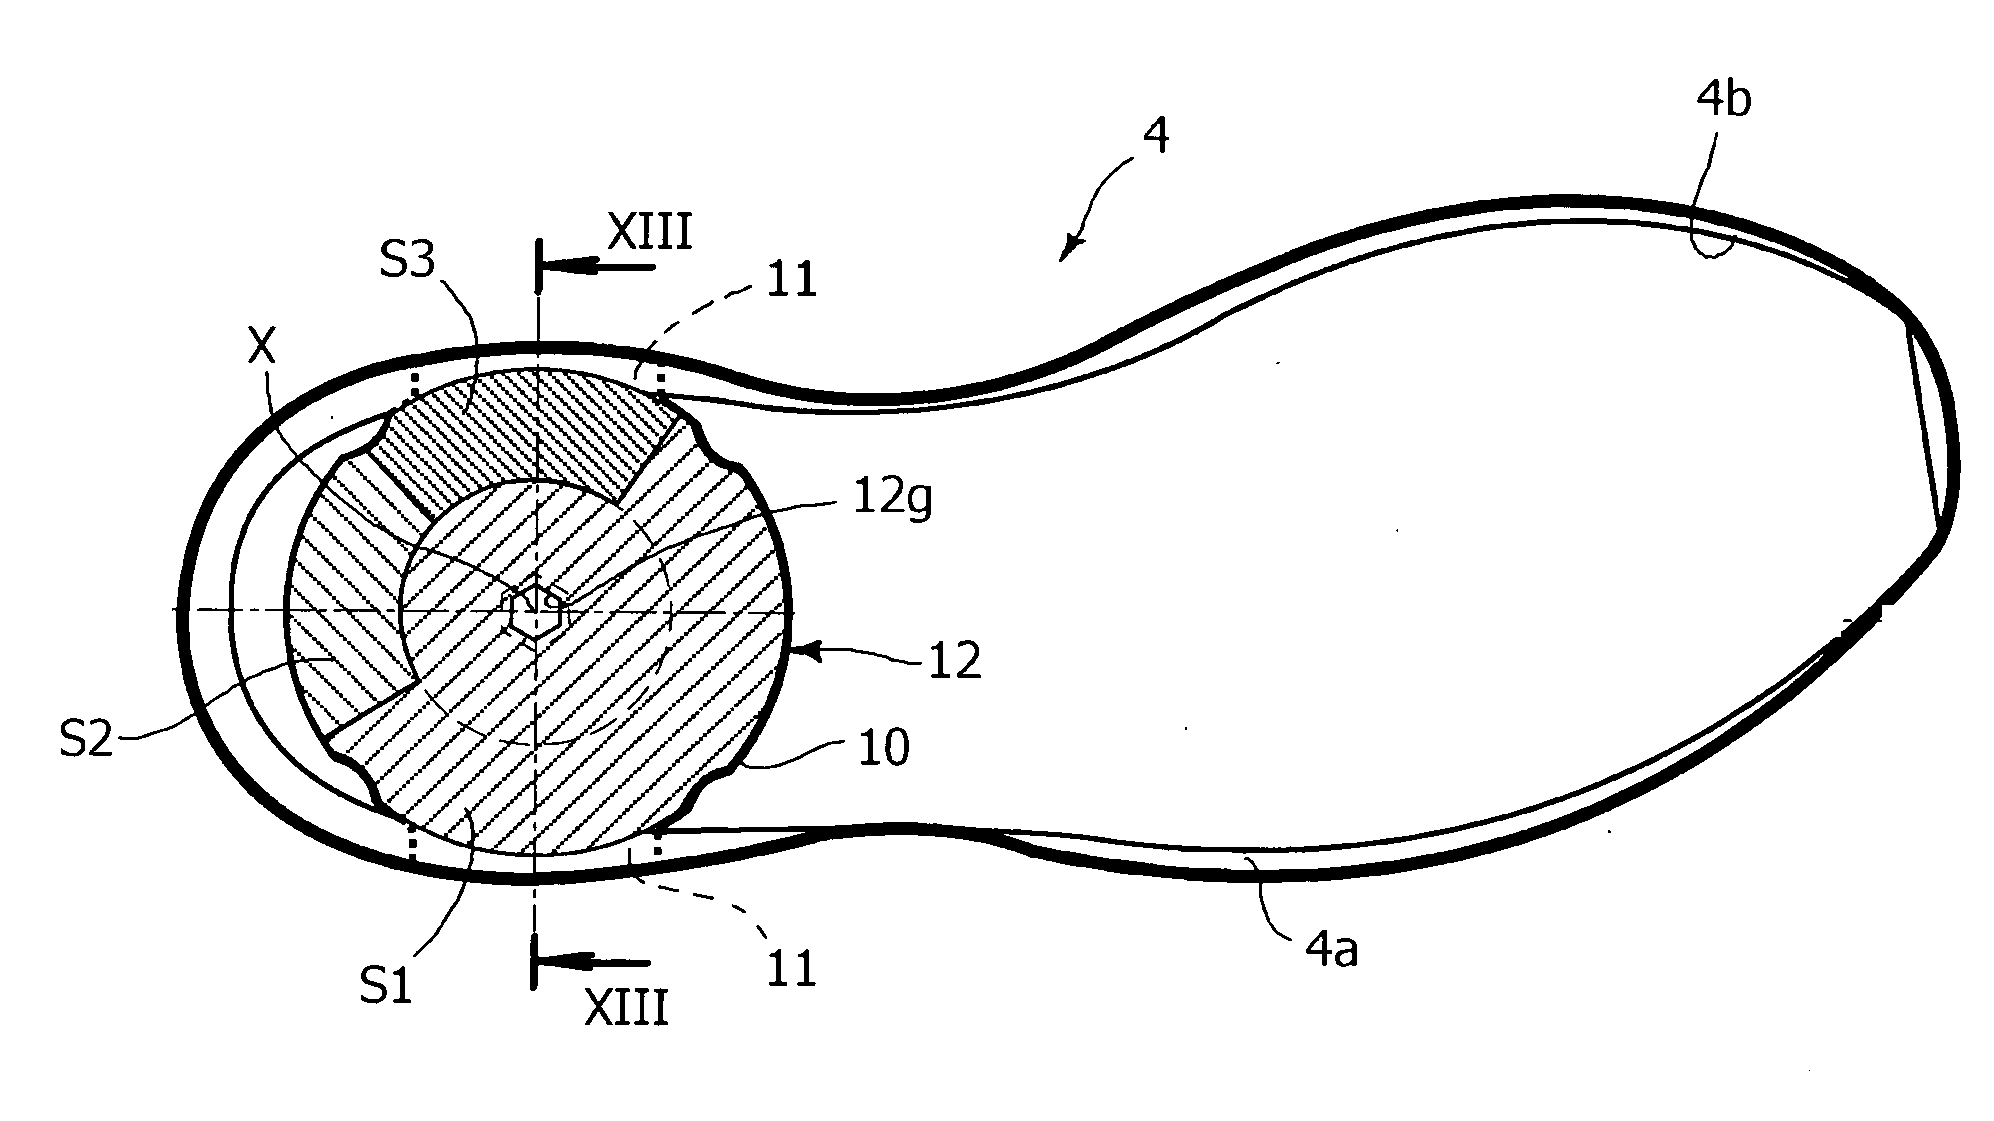 Footwear with an adjustable stabilizing system, in particular for pronation and/or supination control